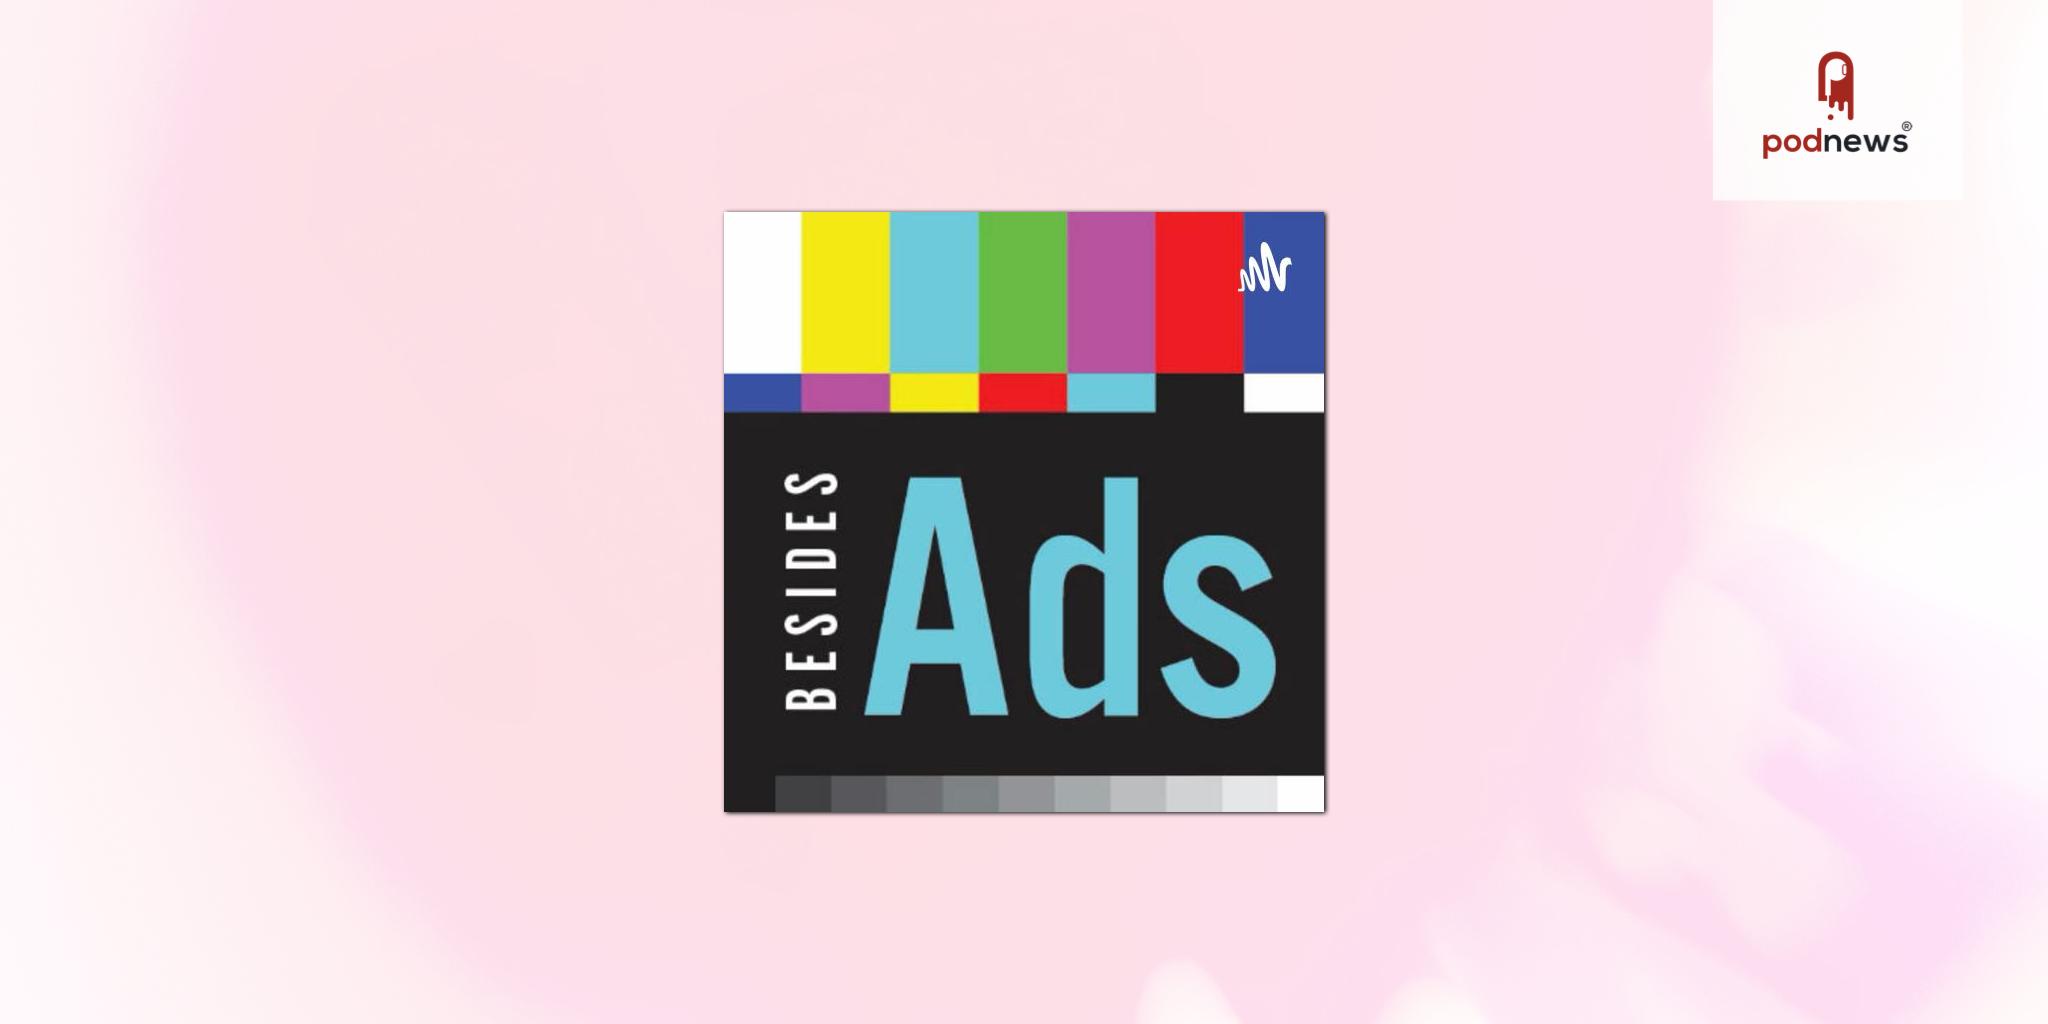 Besides Ads focuses on people in advertising who do remarkable things outside of advertising